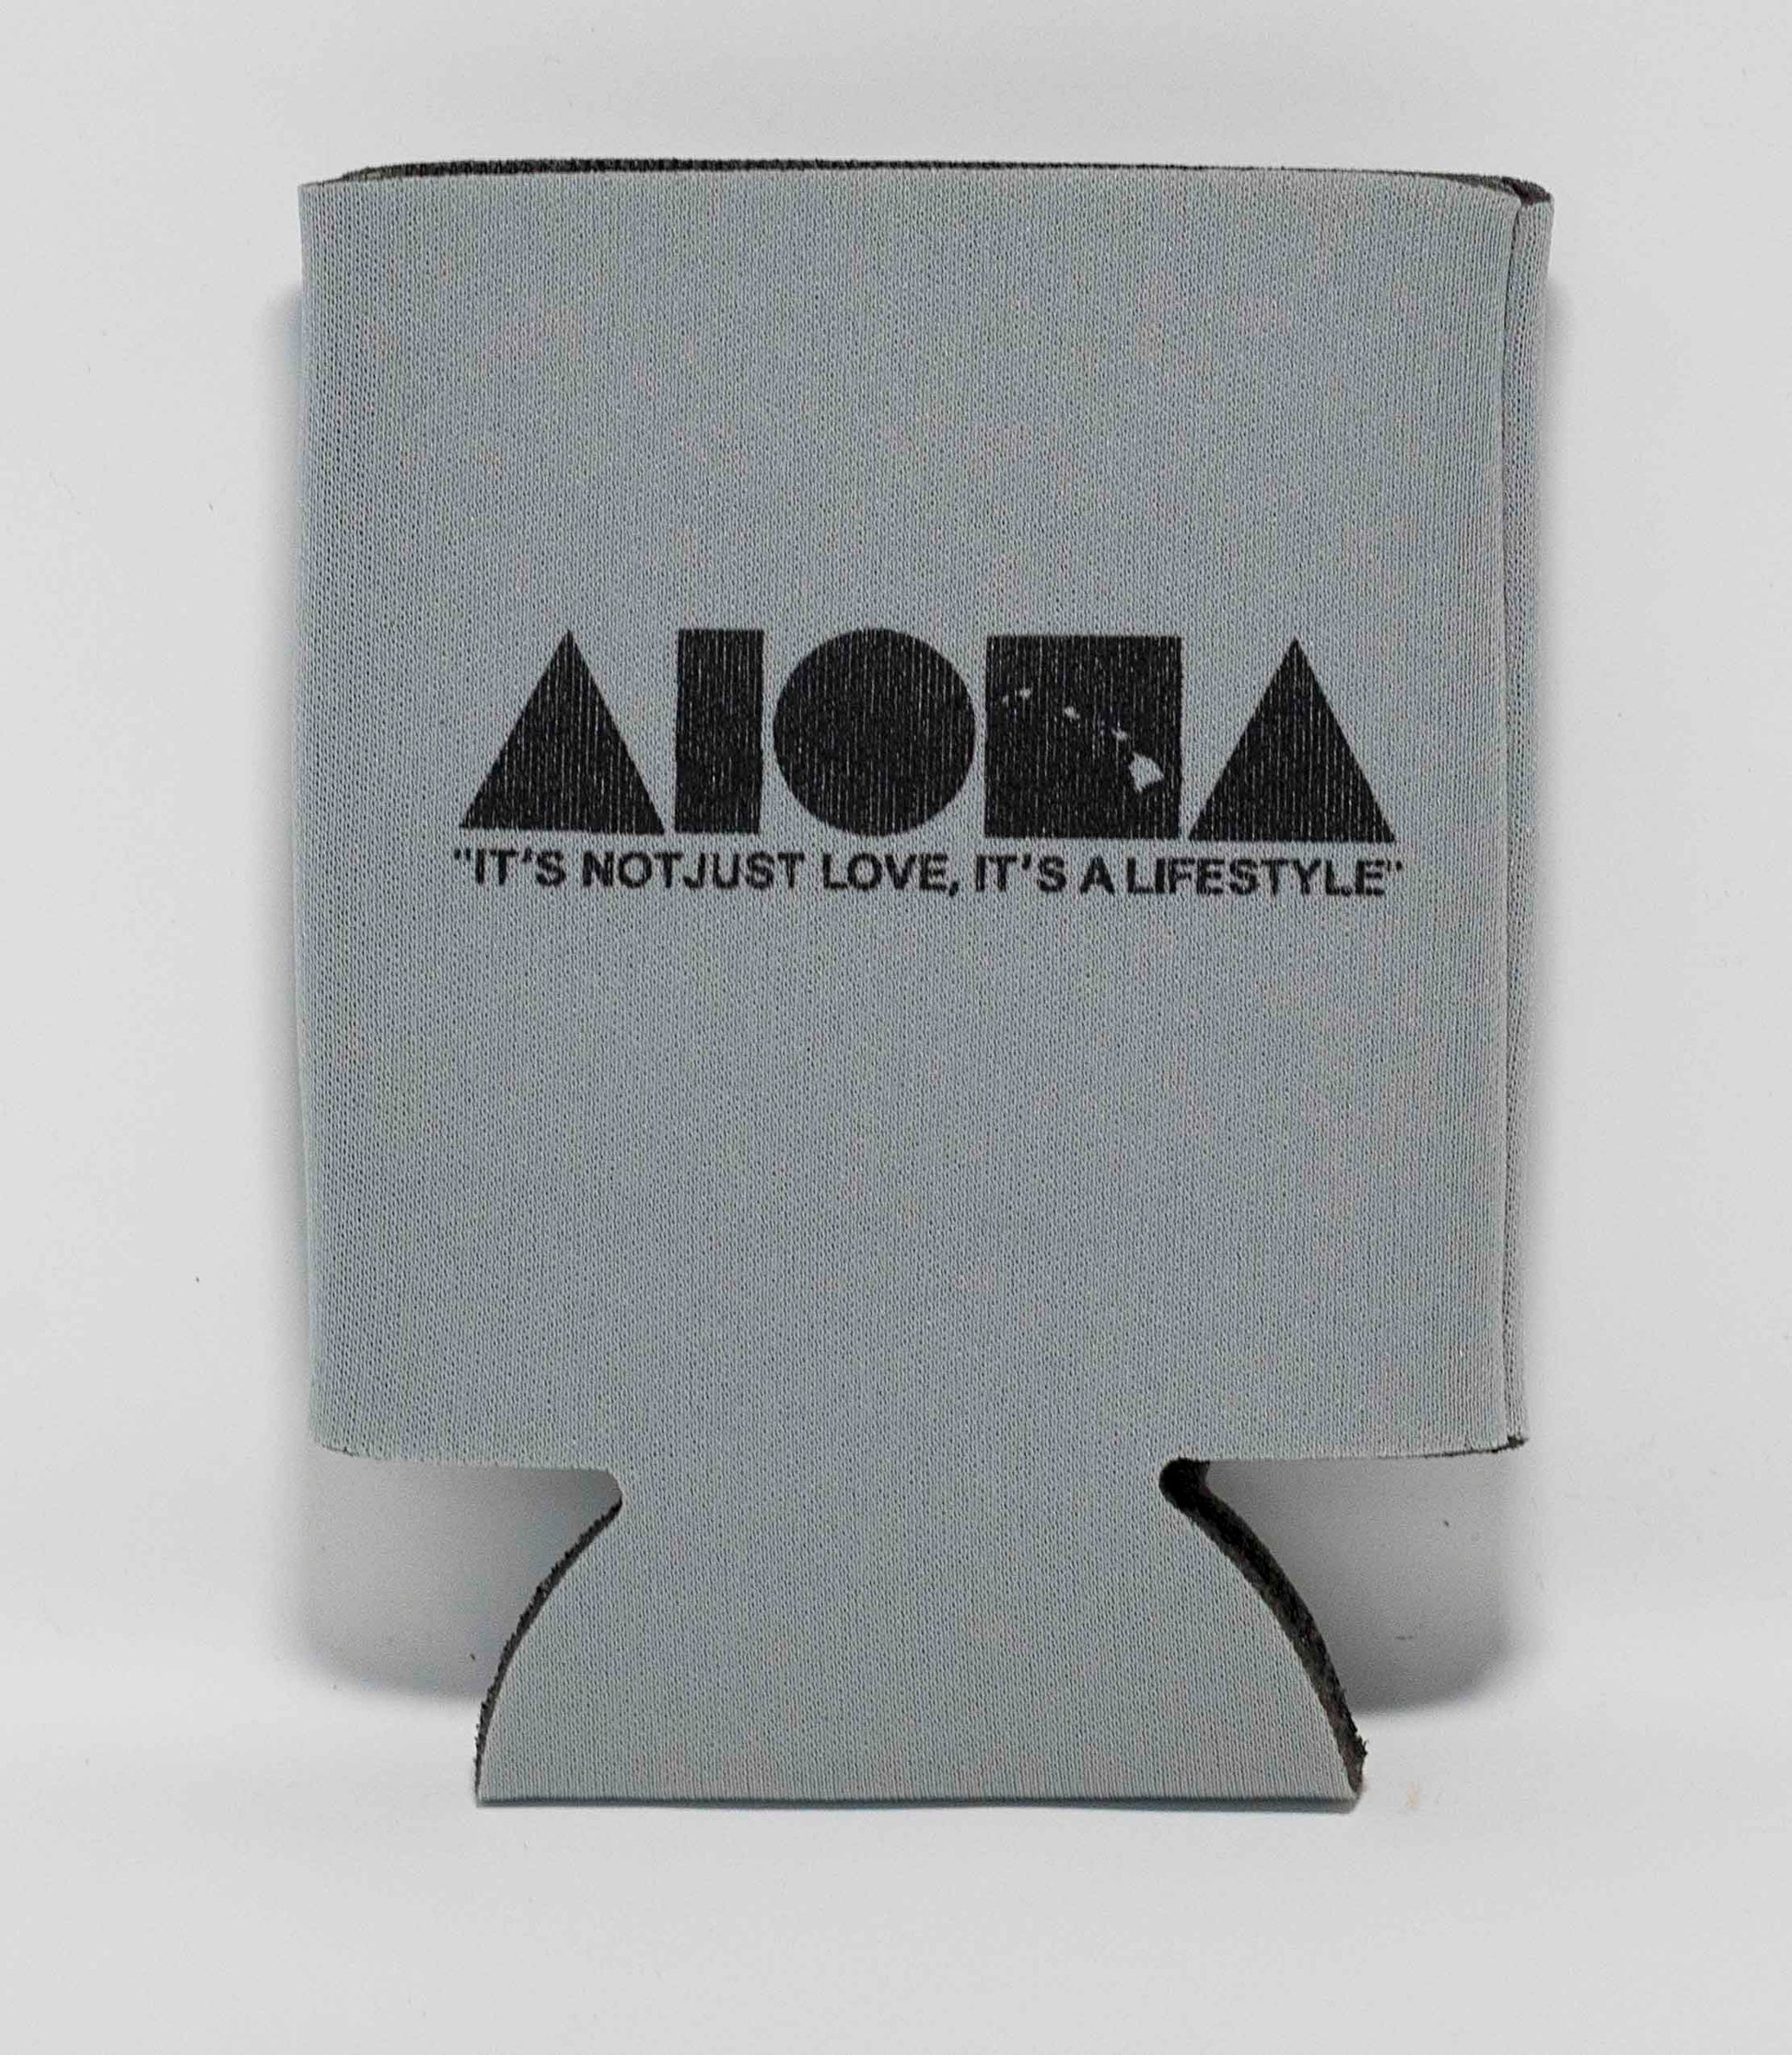 Grey Aloha Shapes ® logo koozie with tagline below "It's not just love, it's a lifestyle"